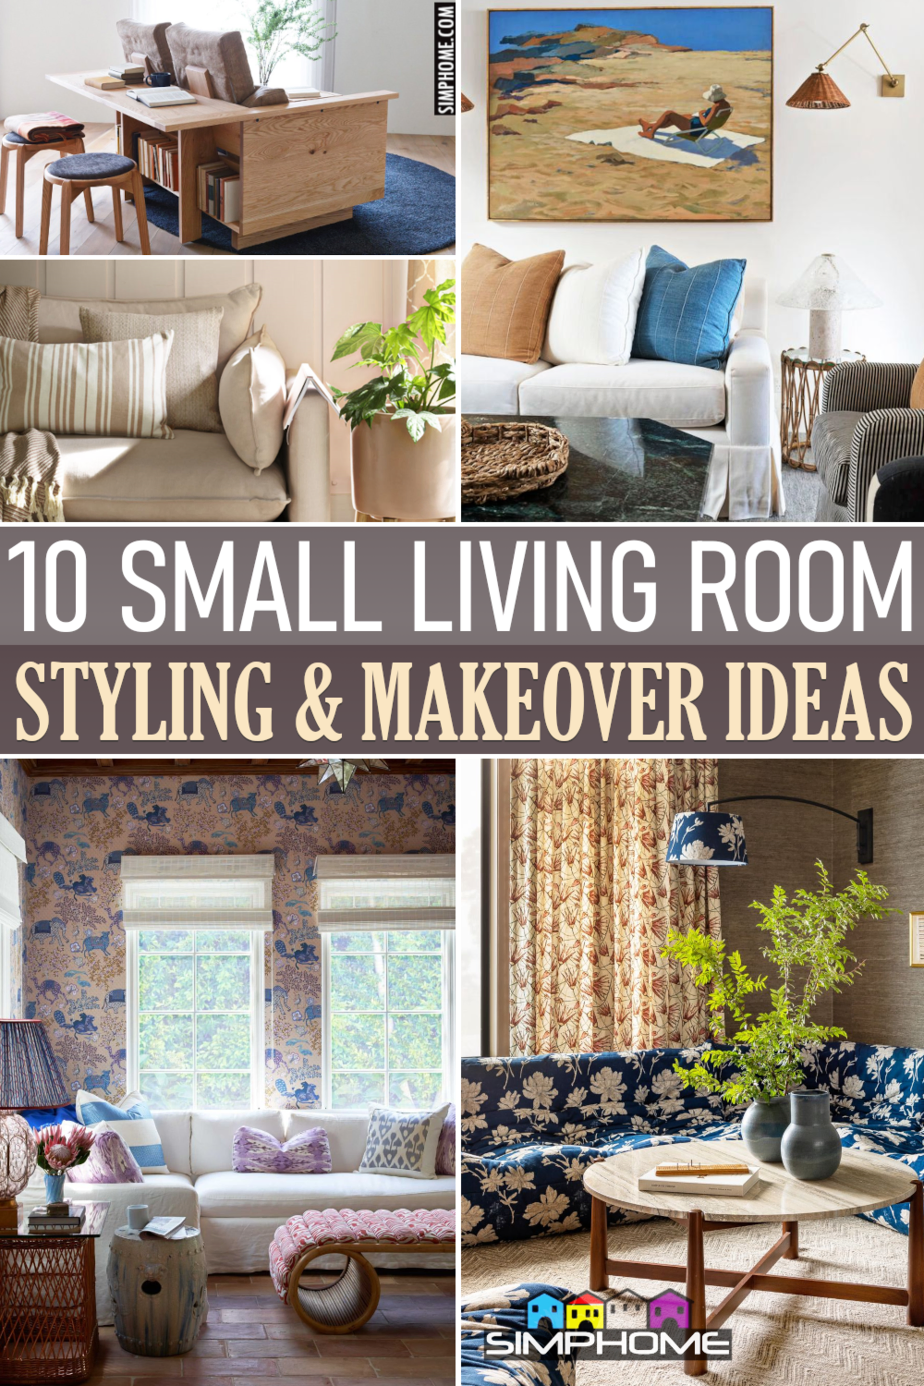 10 Small Living Room Styling Ideas VIA Simphome.comFeatured